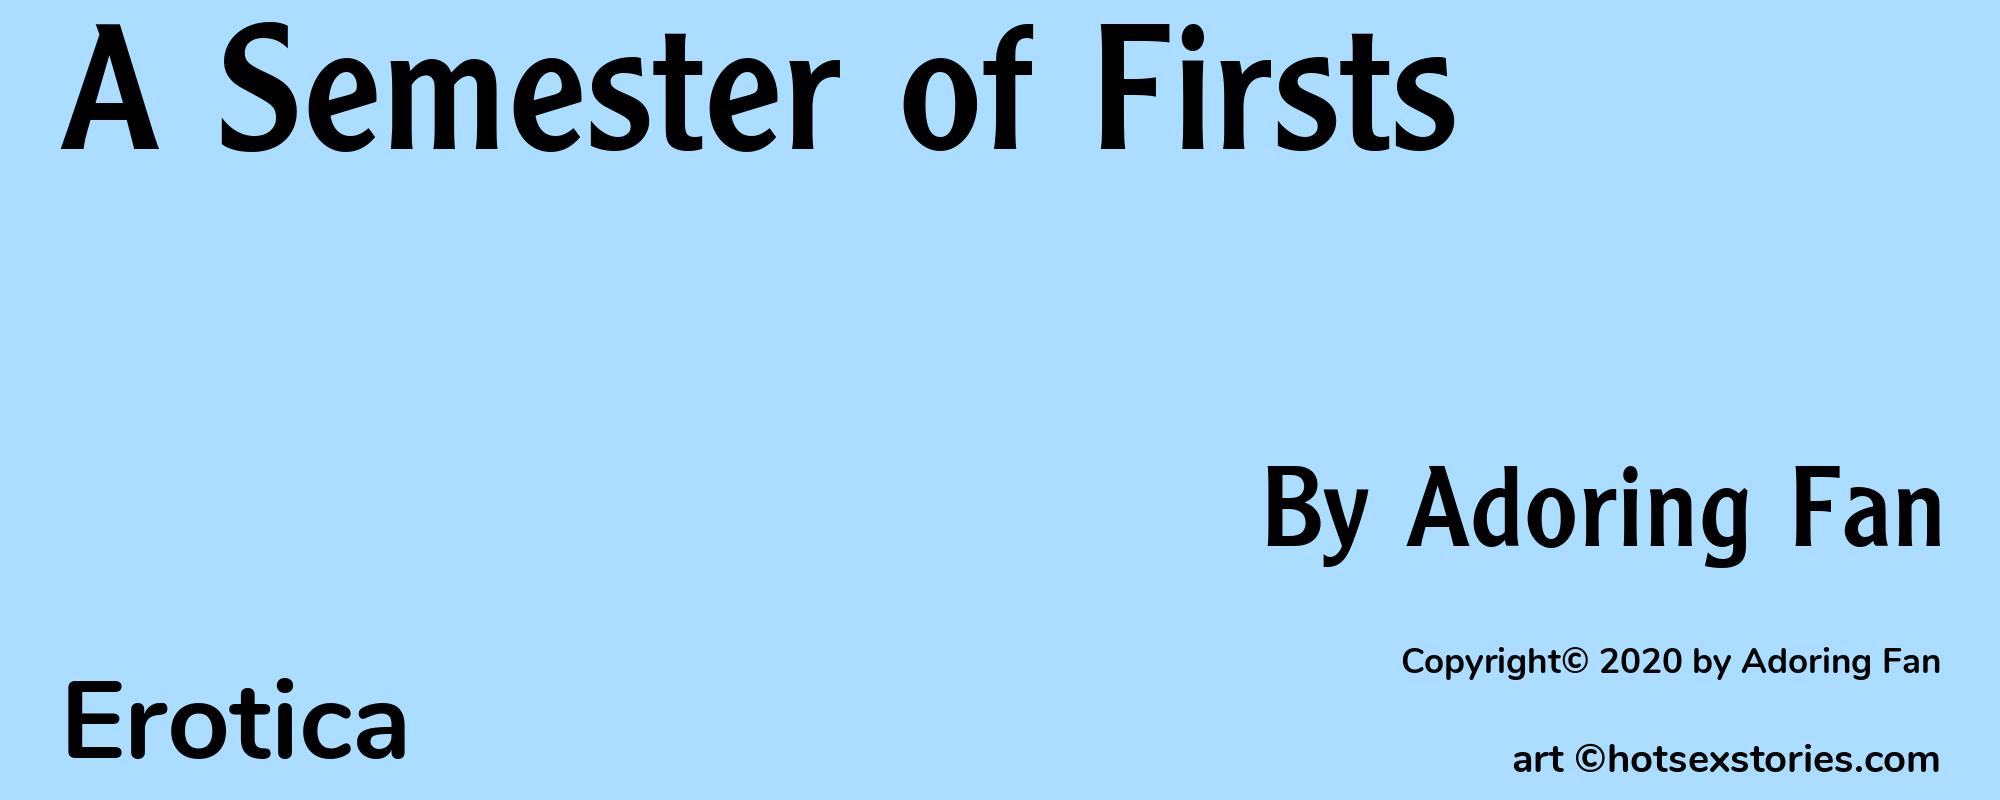 A Semester of Firsts - Cover